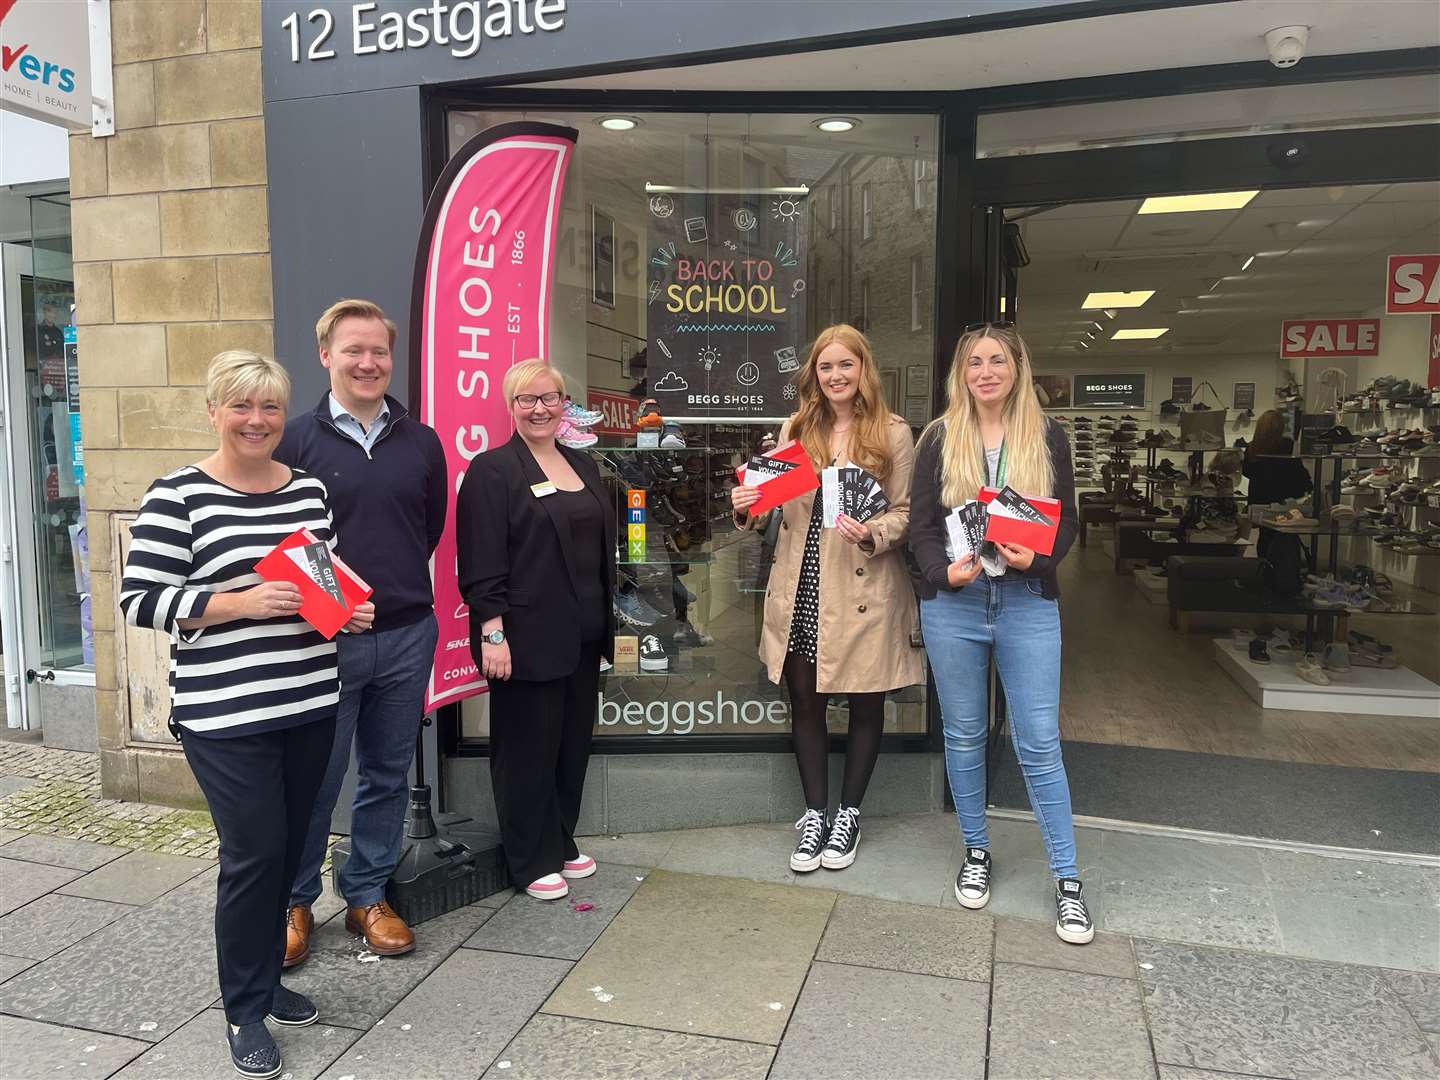 Mel Thomson (founder, HALO), Gavin Begg (director, Begg Shoes), Mhairi Macleod (store manager, Begg Shoes), Caoimhe Simpson (trustee, HALO) and Jackie Crennell (early years practitioner).